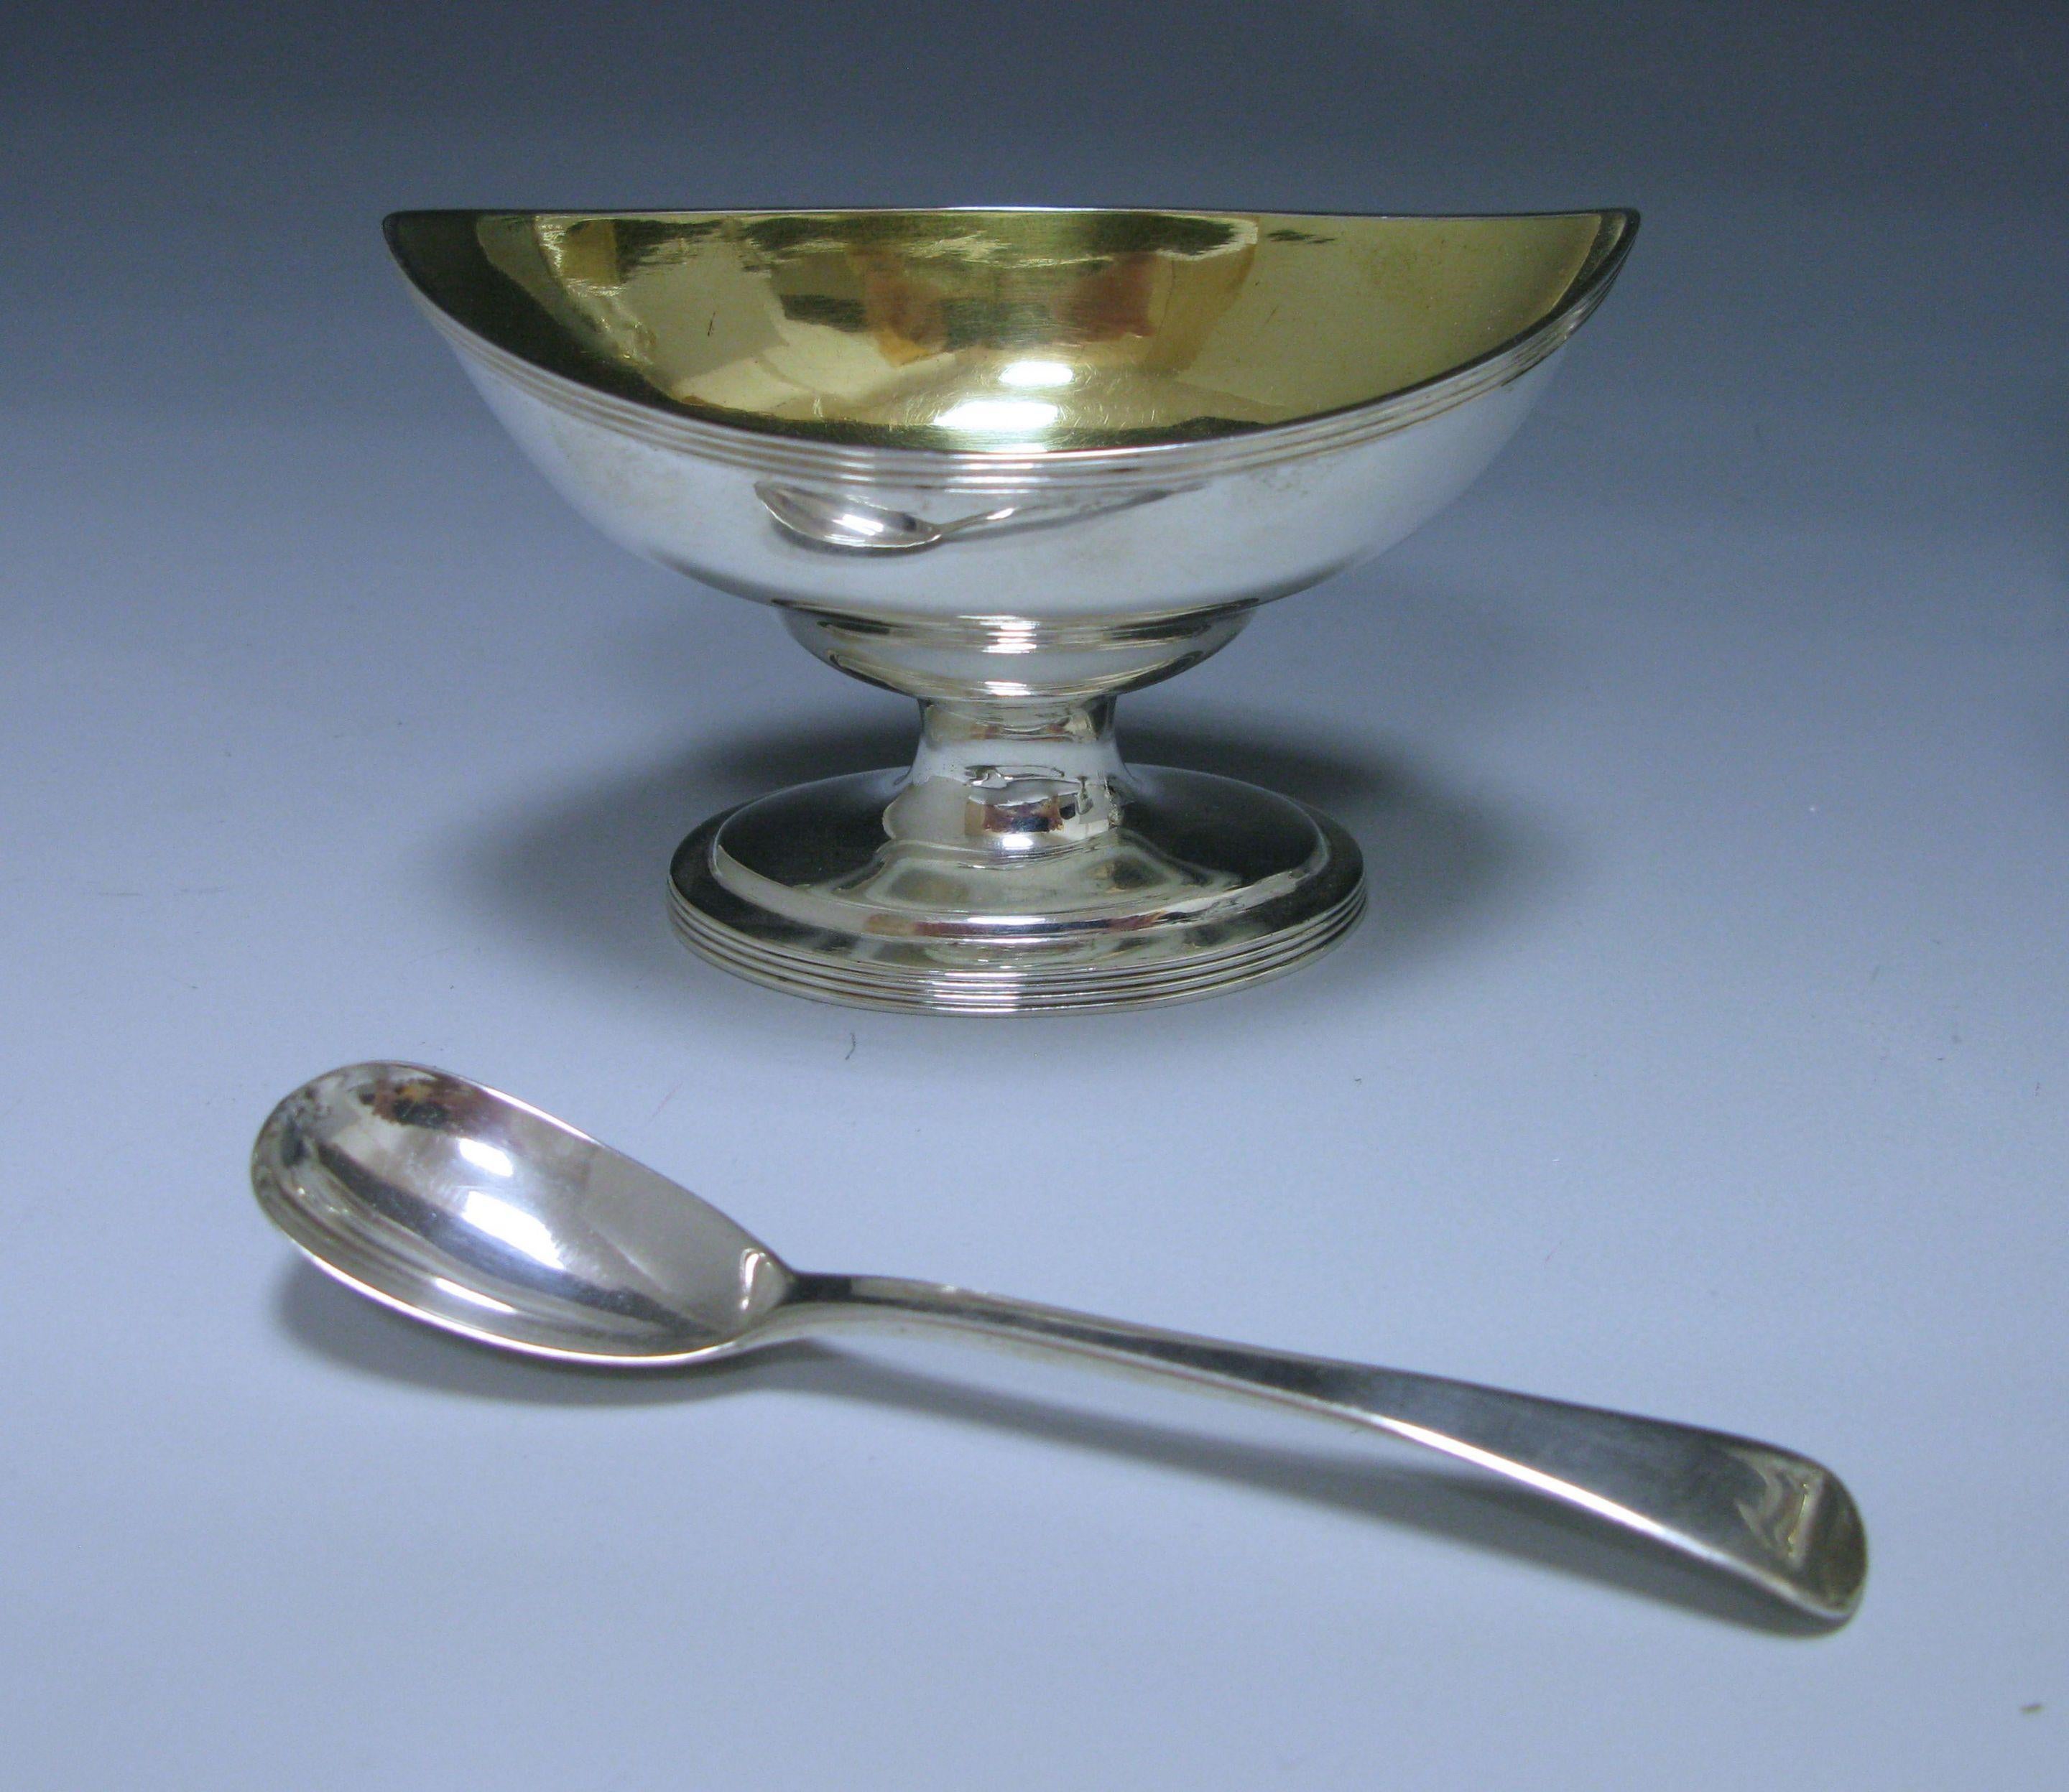 Set of four George III antique sterling silver salts of navette form with reeded borders all standing on oval pedestal bases on which reeded borders are repeated. The interior of each salt is gilded. They were made by Peter and Ann Bateman and over